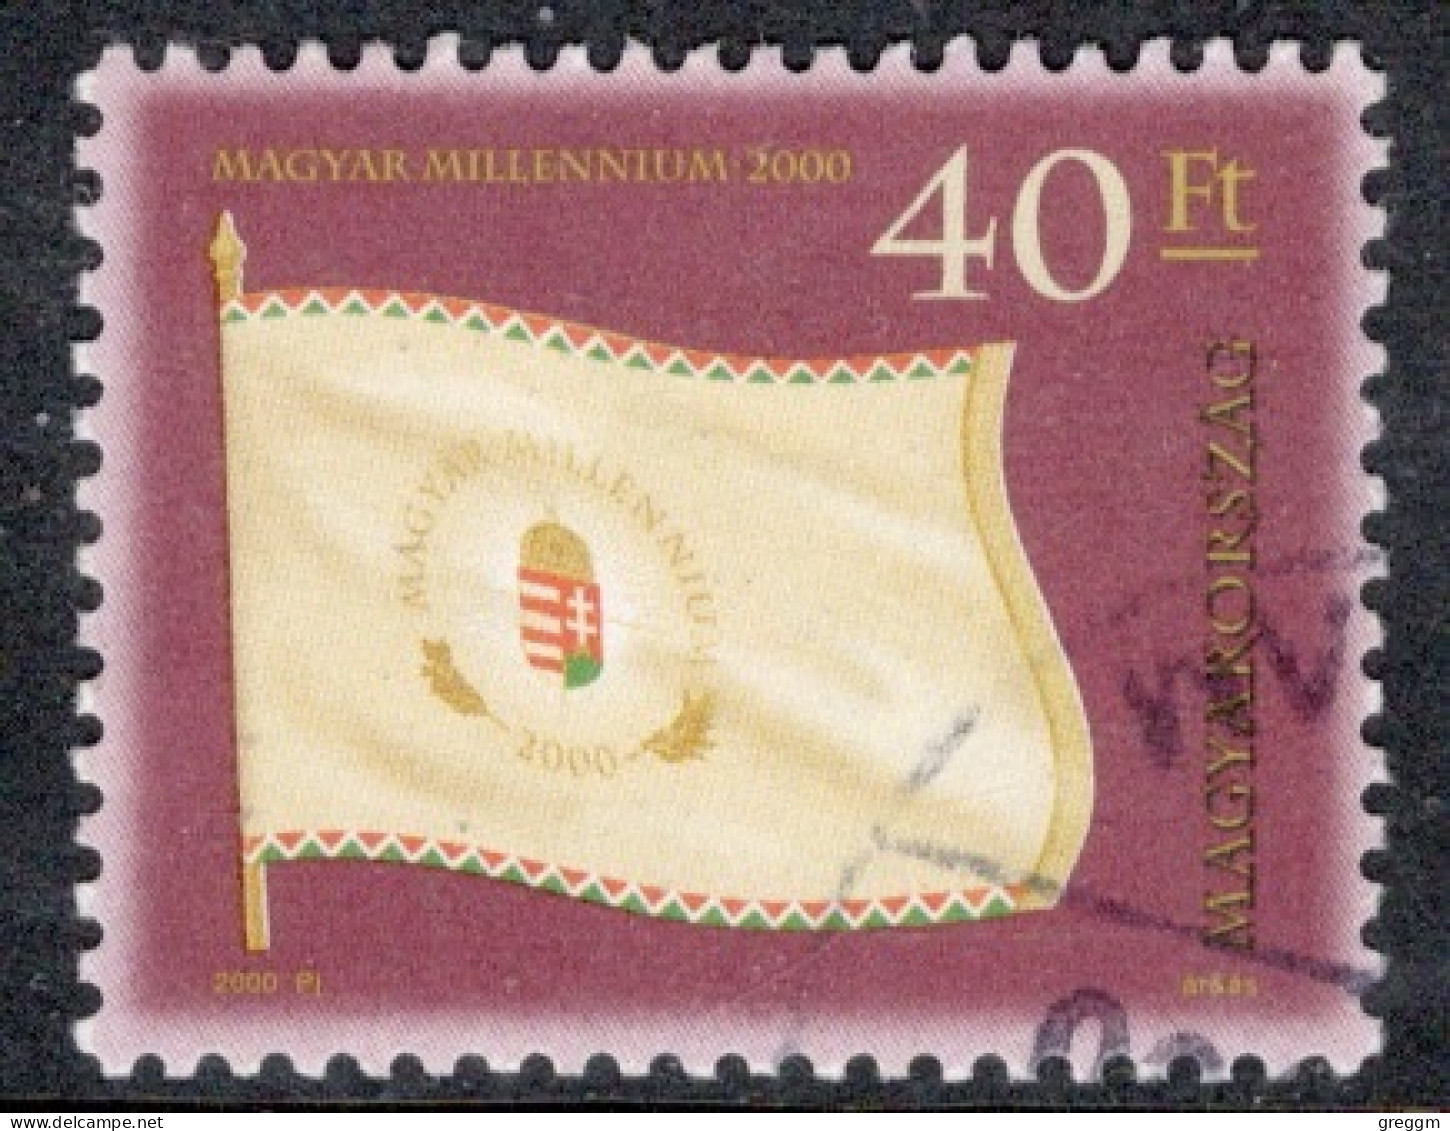 Hungary 2000  Single Stamp Celebrating Millennium In Fine Used - Used Stamps